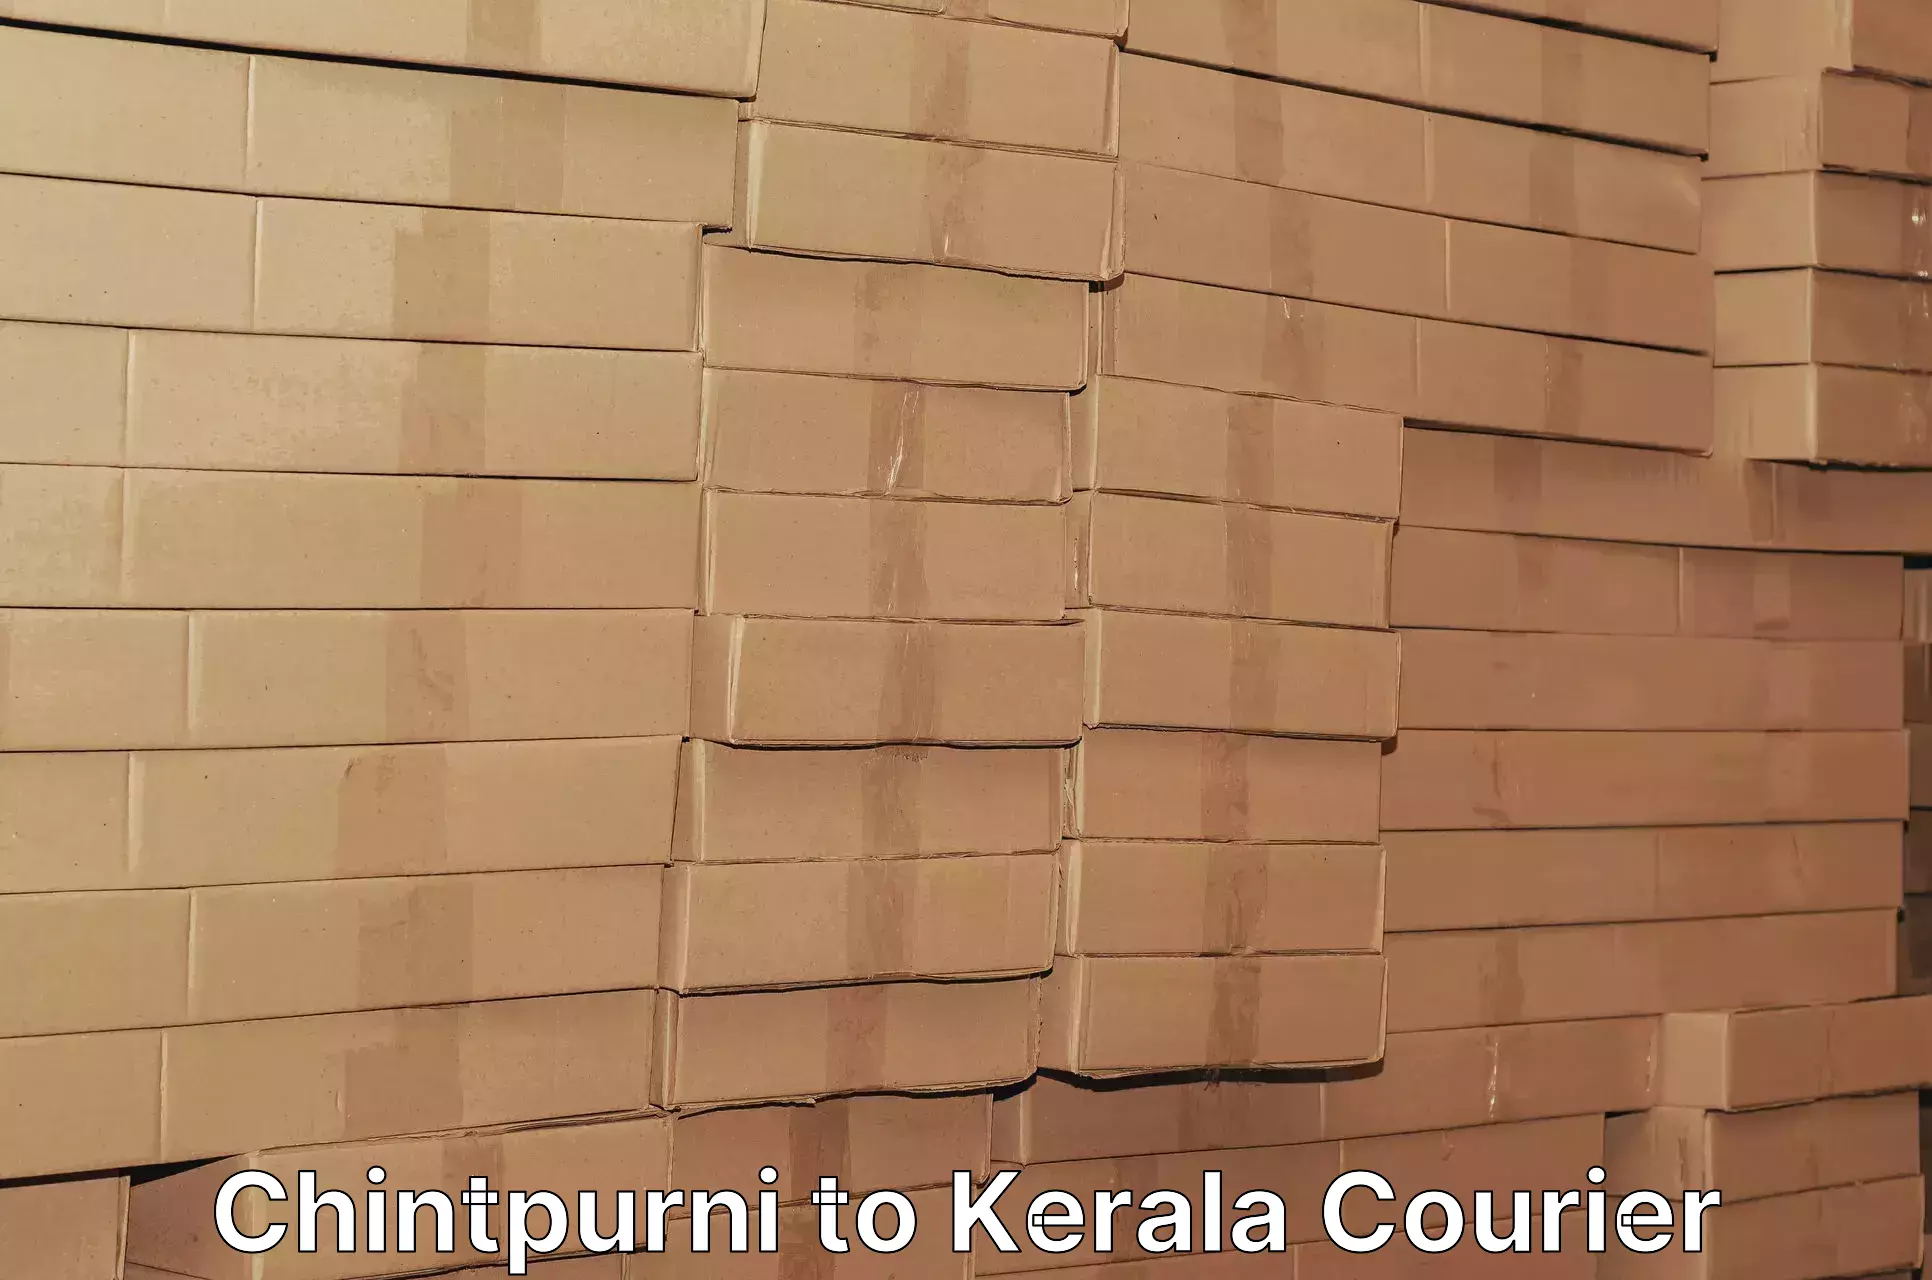 Local delivery service Chintpurni to Kerala